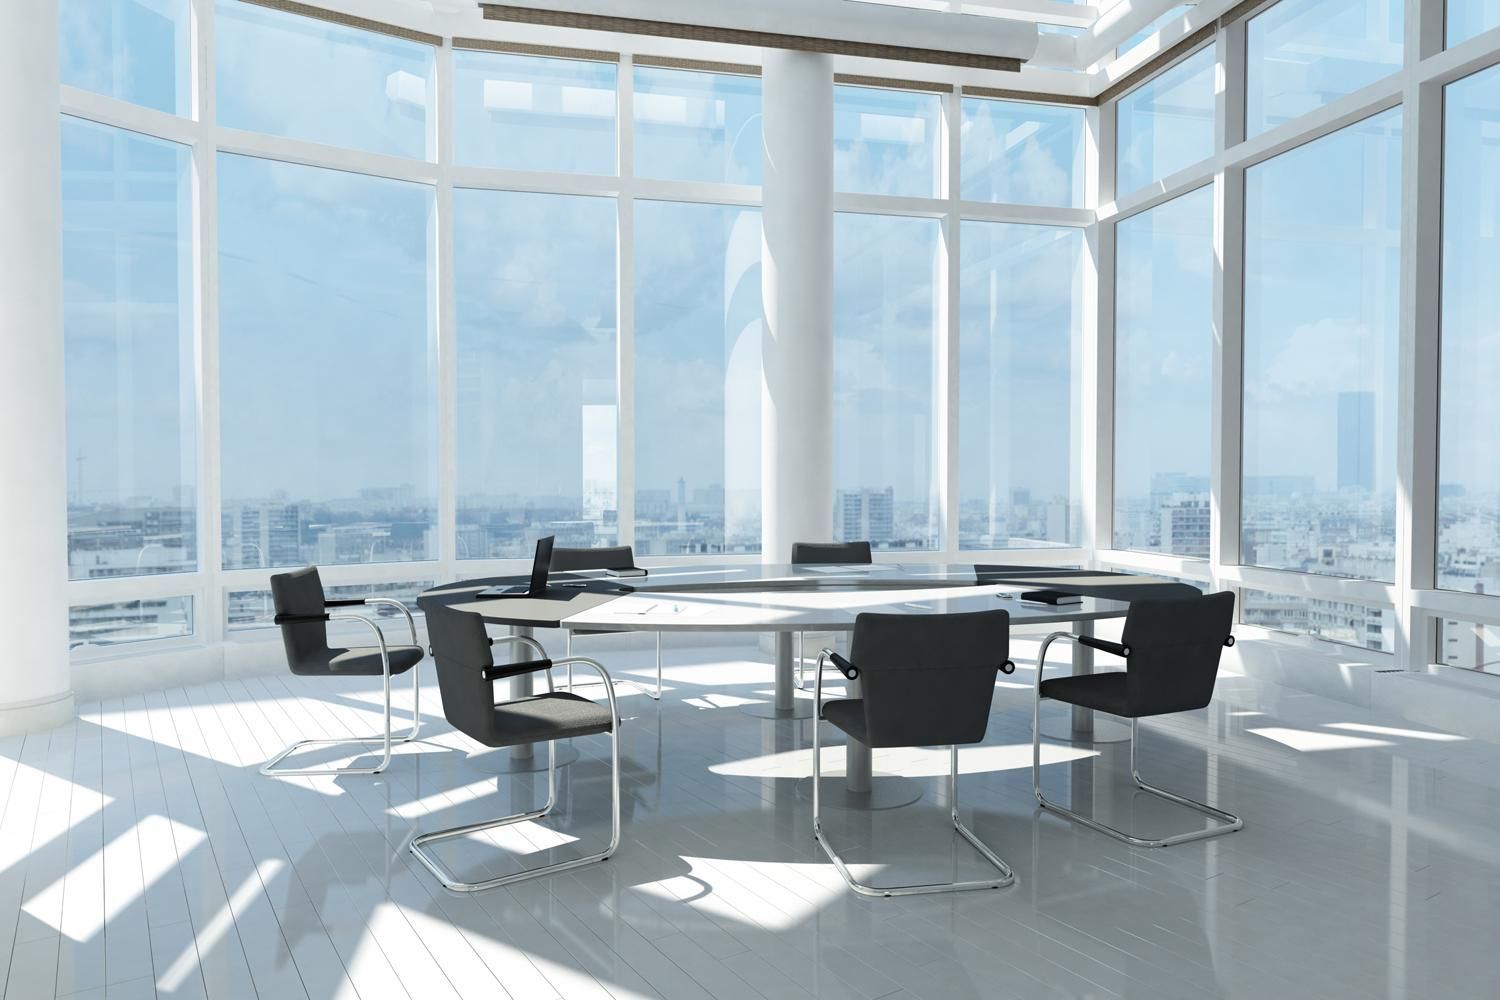 Discover the top players in office window tinting for Miami – 3M, LLumar, and Huper Optik. 